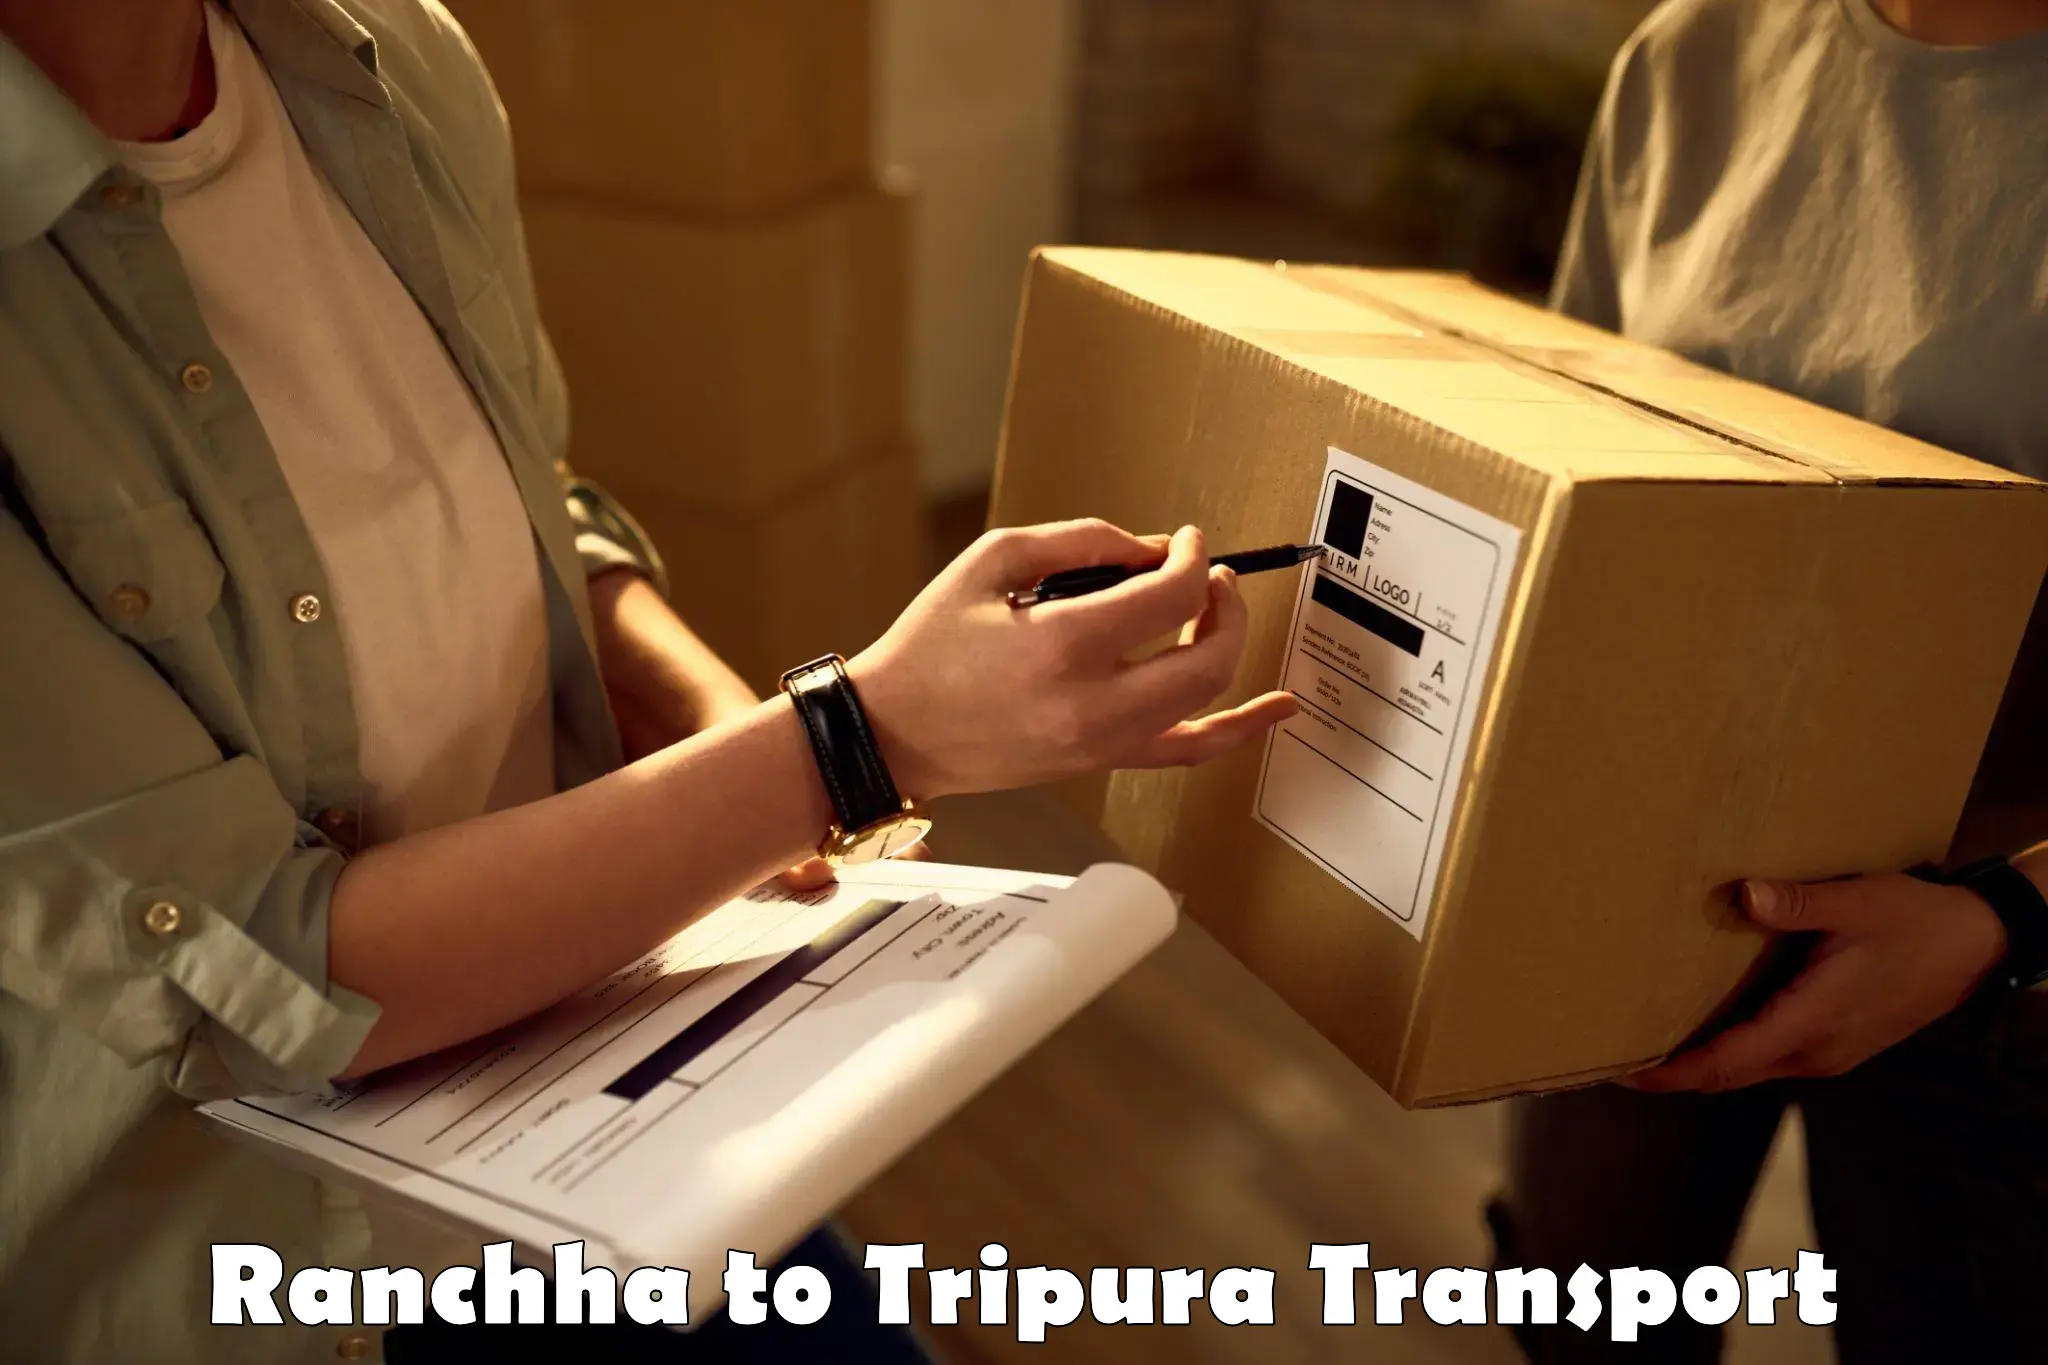 Express transport services Ranchha to Udaipur Tripura